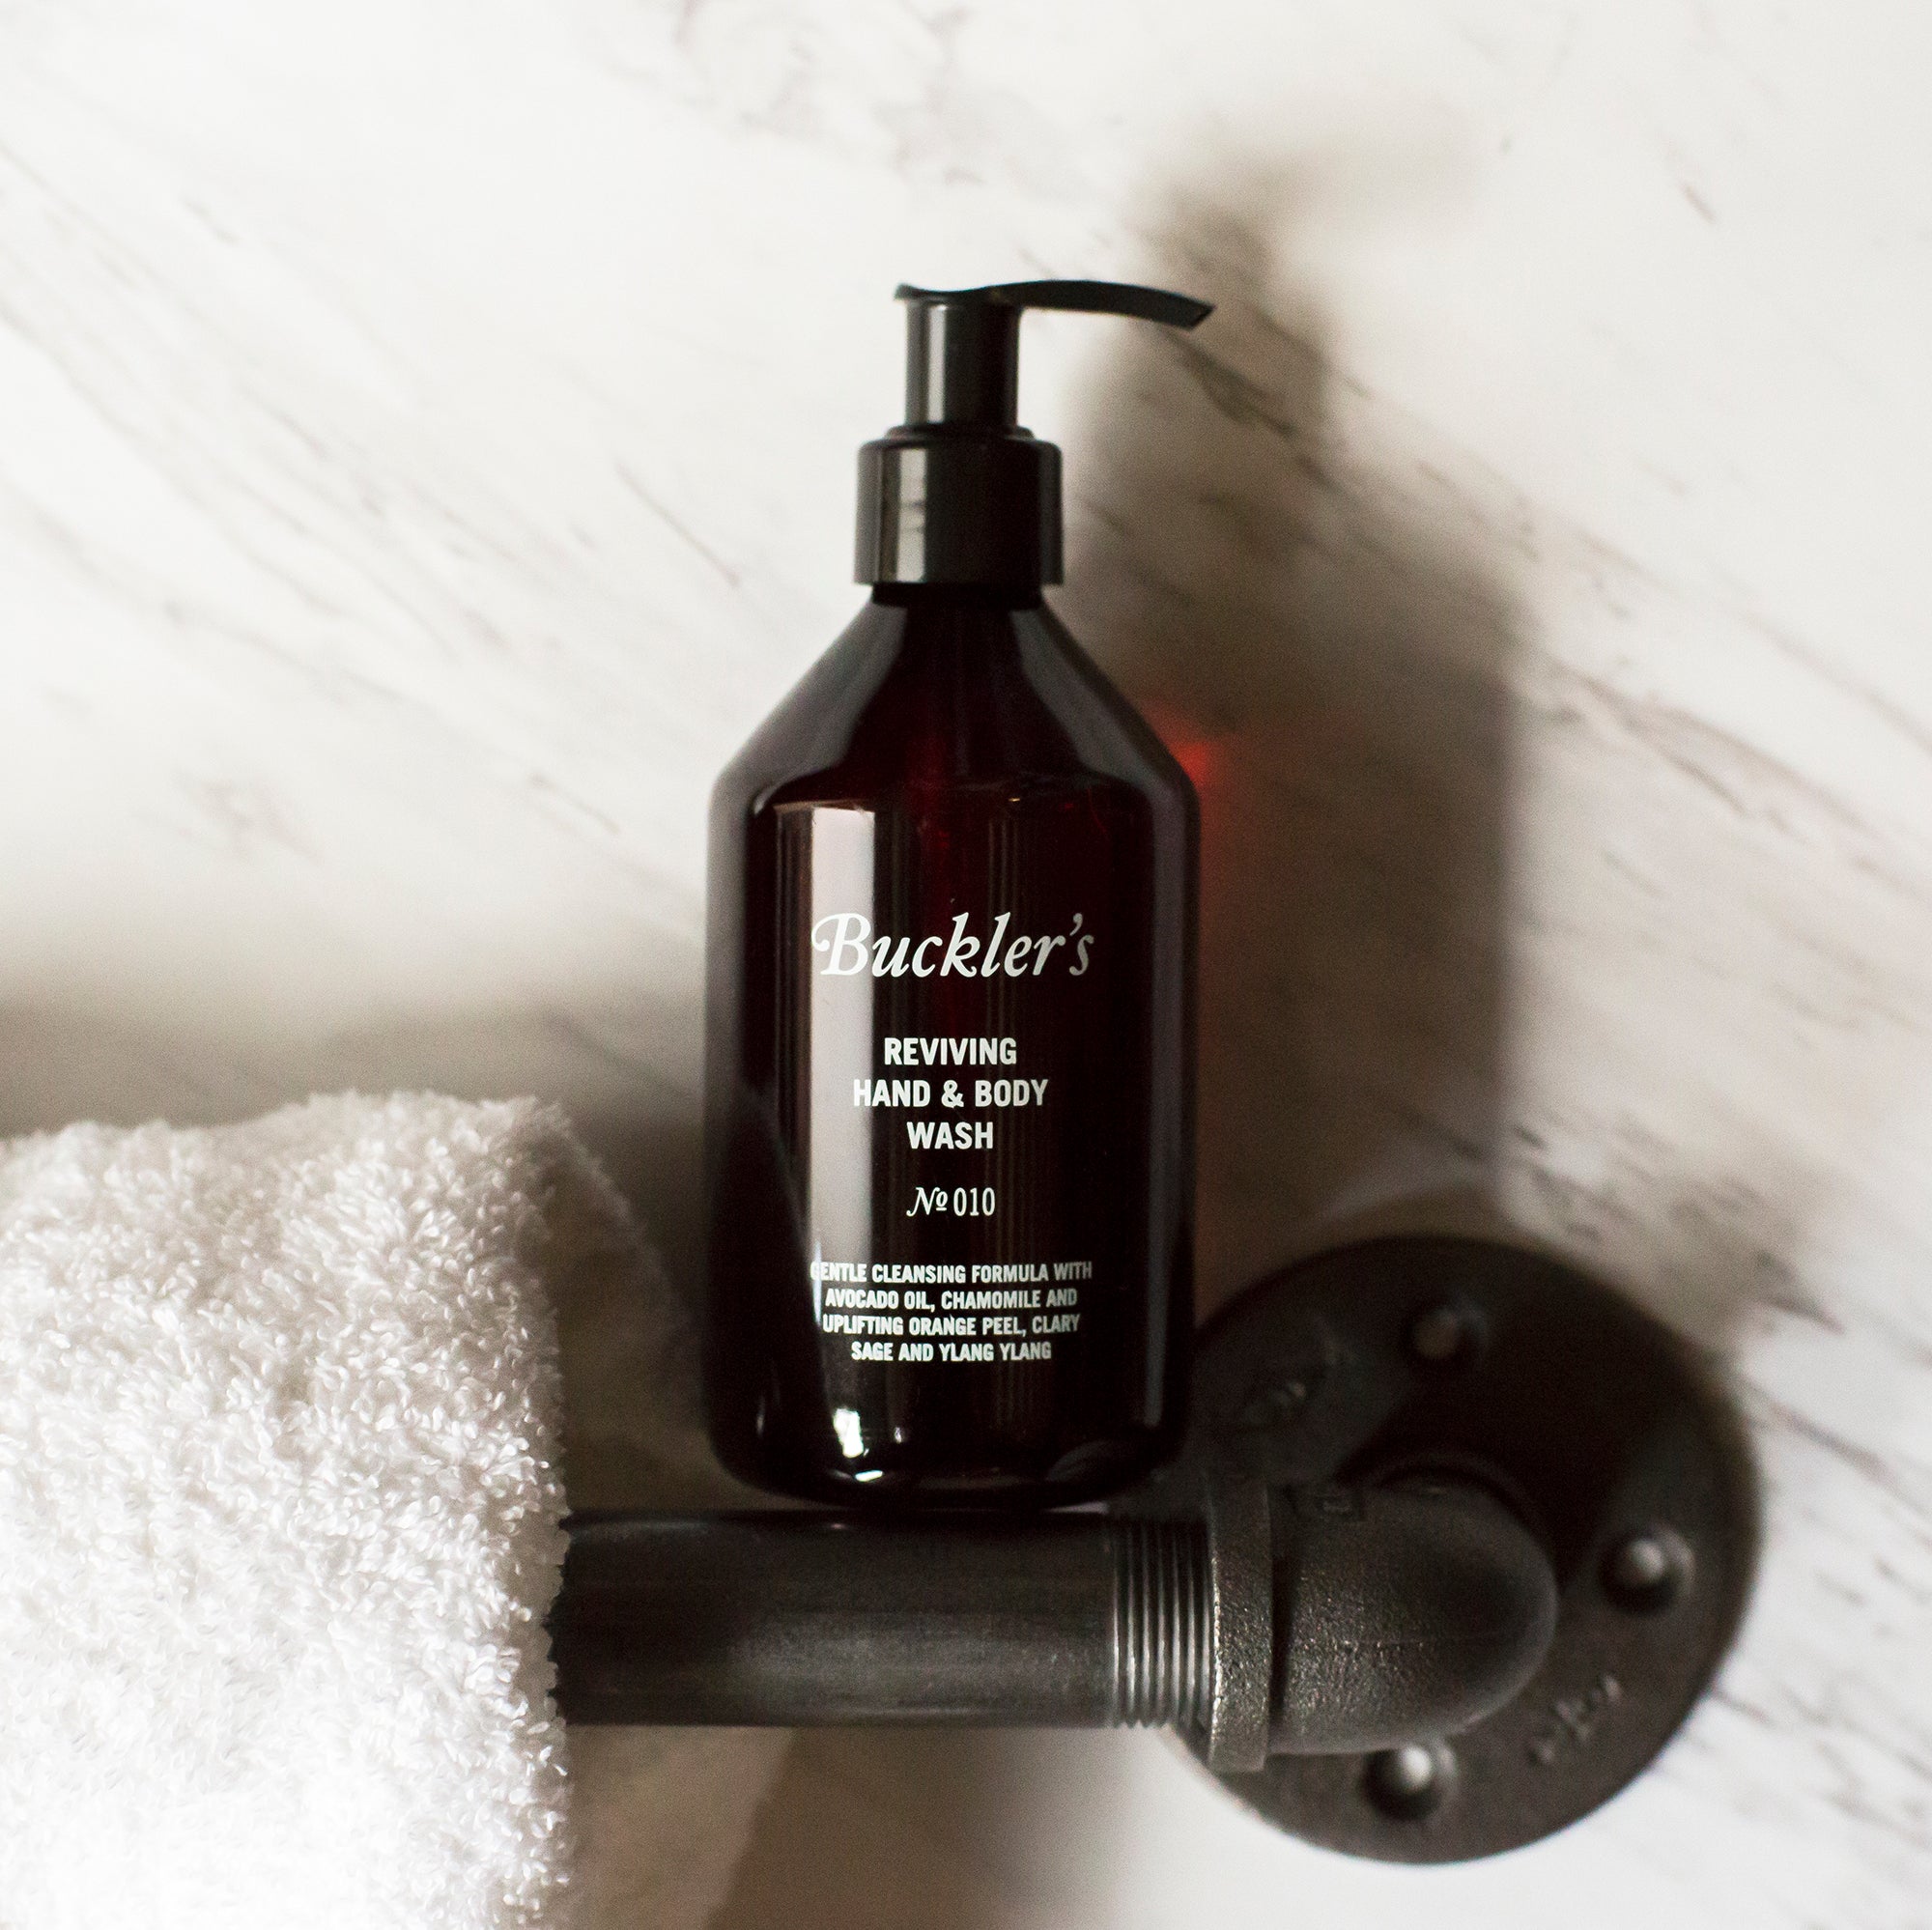 The Buckler's Reviving Hand & Body Wash in a red wine-colored bottle with a black pump top stands on a silver bathroom handle bar next to a white towel against a white and gray marble background.